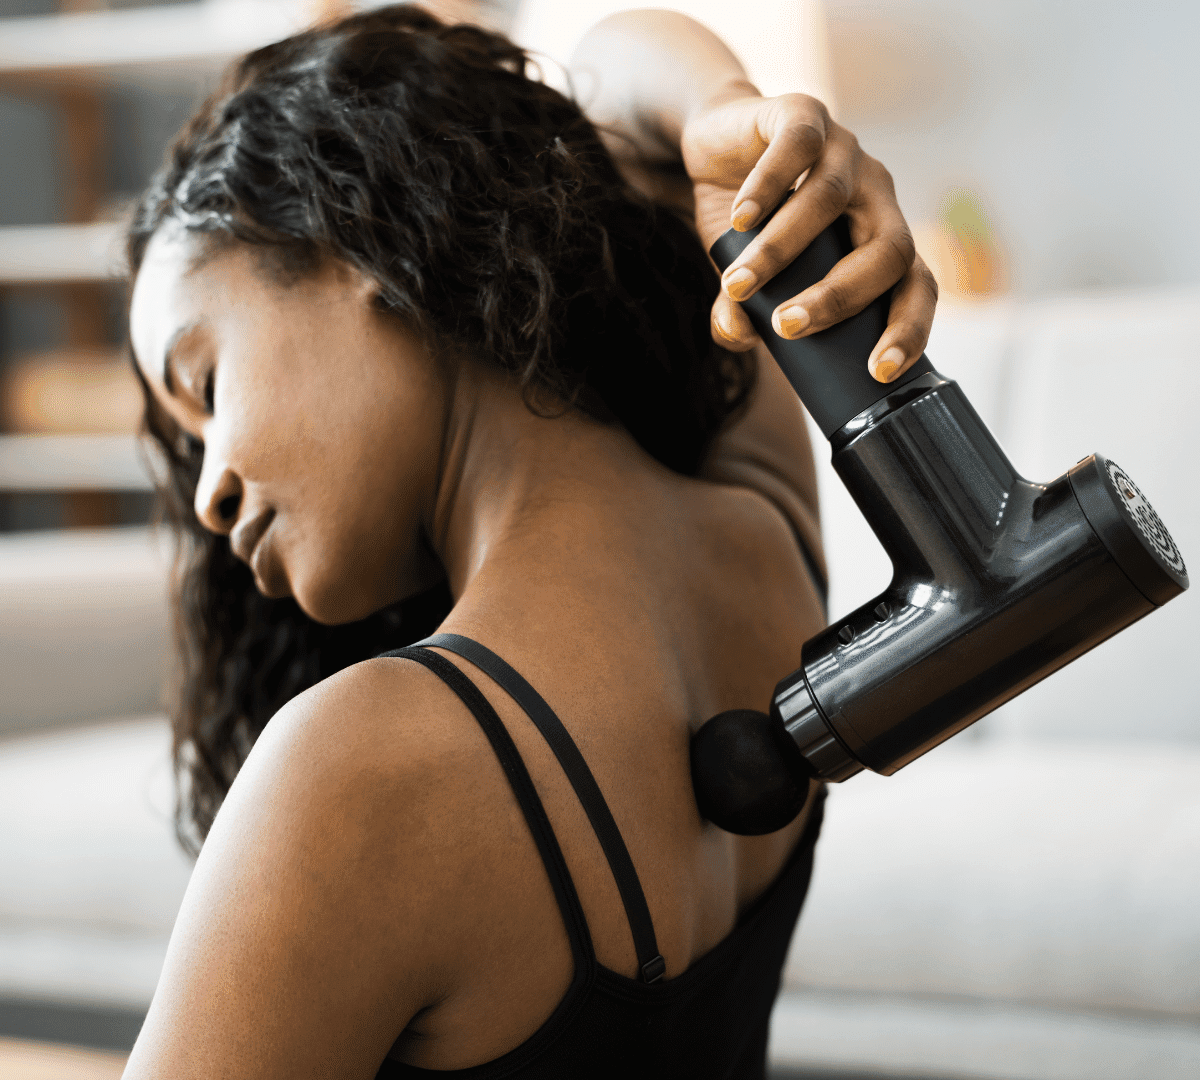 Do You Need To Drop $200+ On A Massage Gun? 